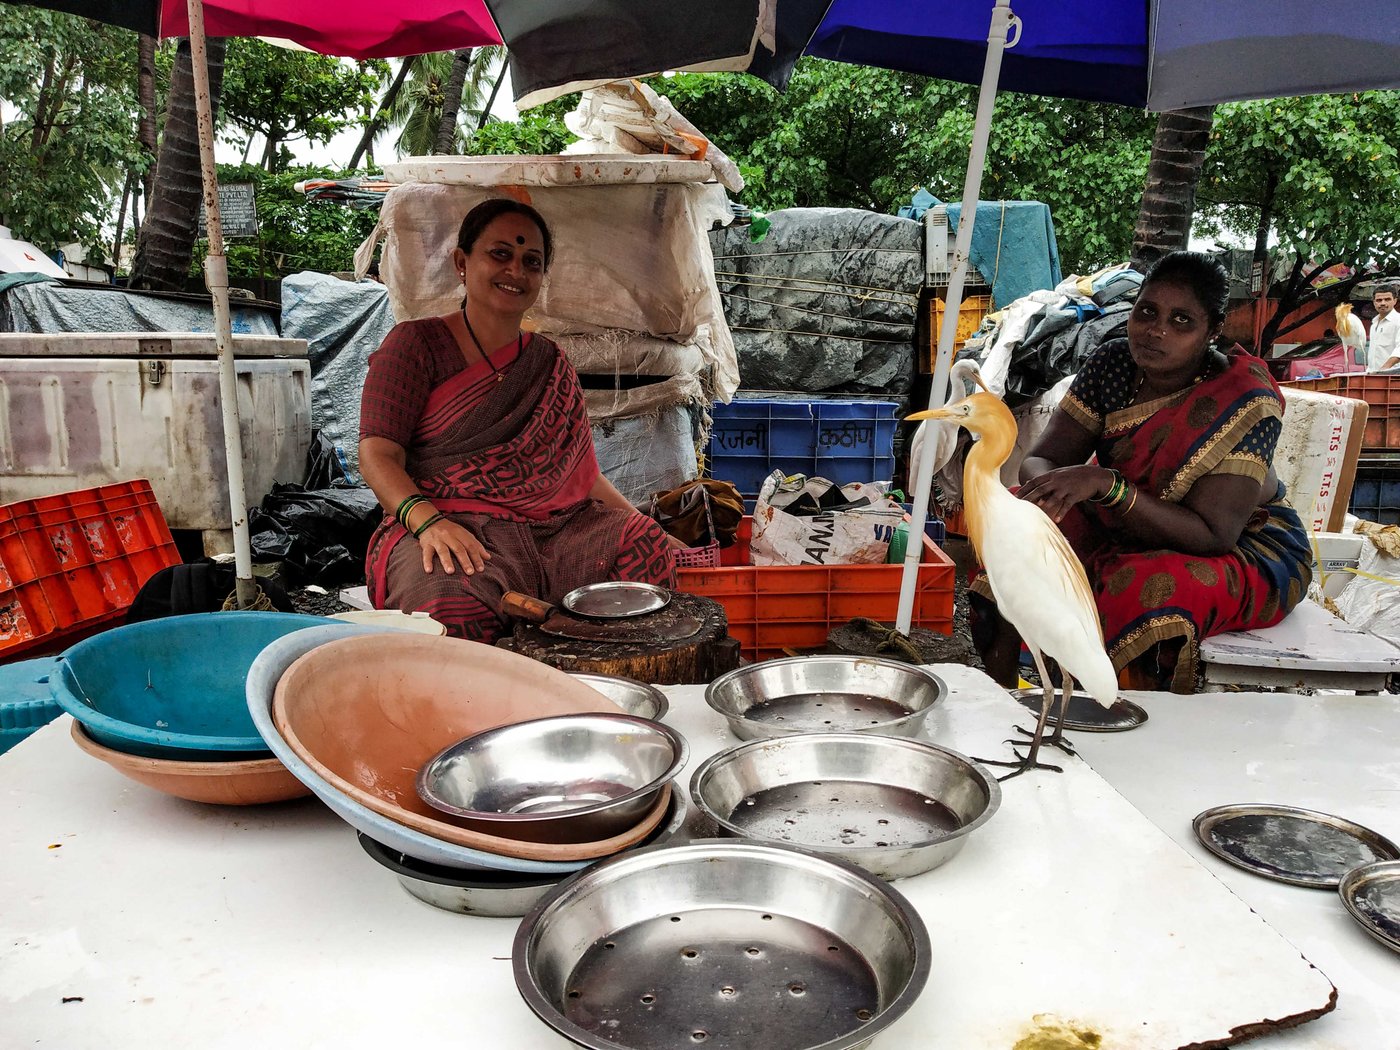 Harsha Tapke (left), who has been selling fish for 30 years, speaks of the changes she has seen. With her is helper Yashoda Dhangar, from Kurnool district of Andhra Pradesh